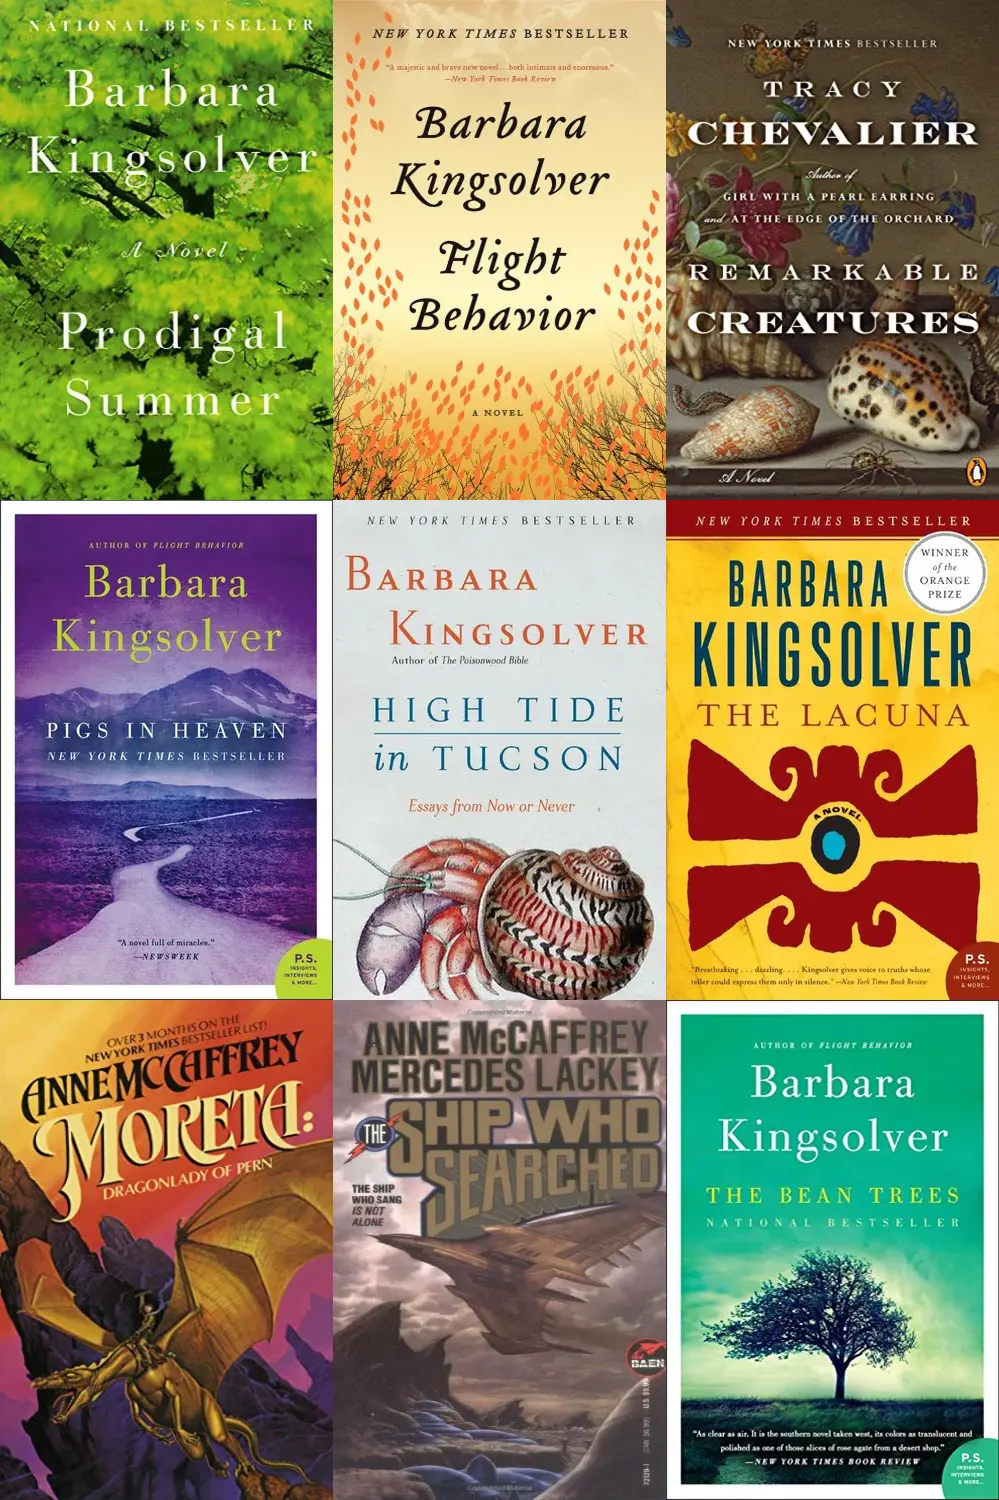 If I liked Animal Dreams by Barbara Kingsolver, what should I read next?